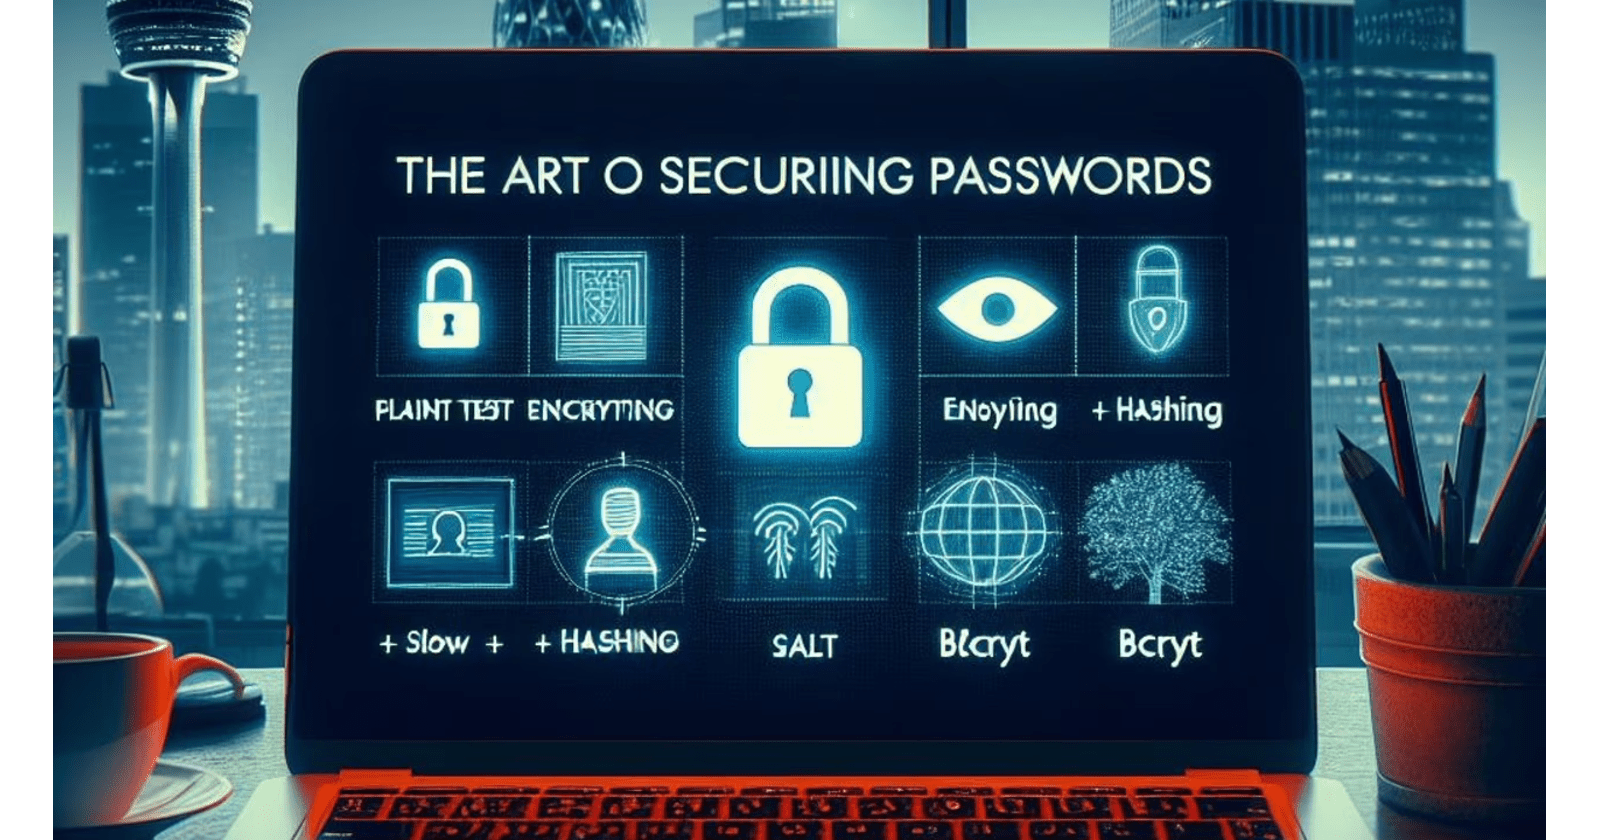 The Art of Securing Passwords: From Plain Text to Bcrypt